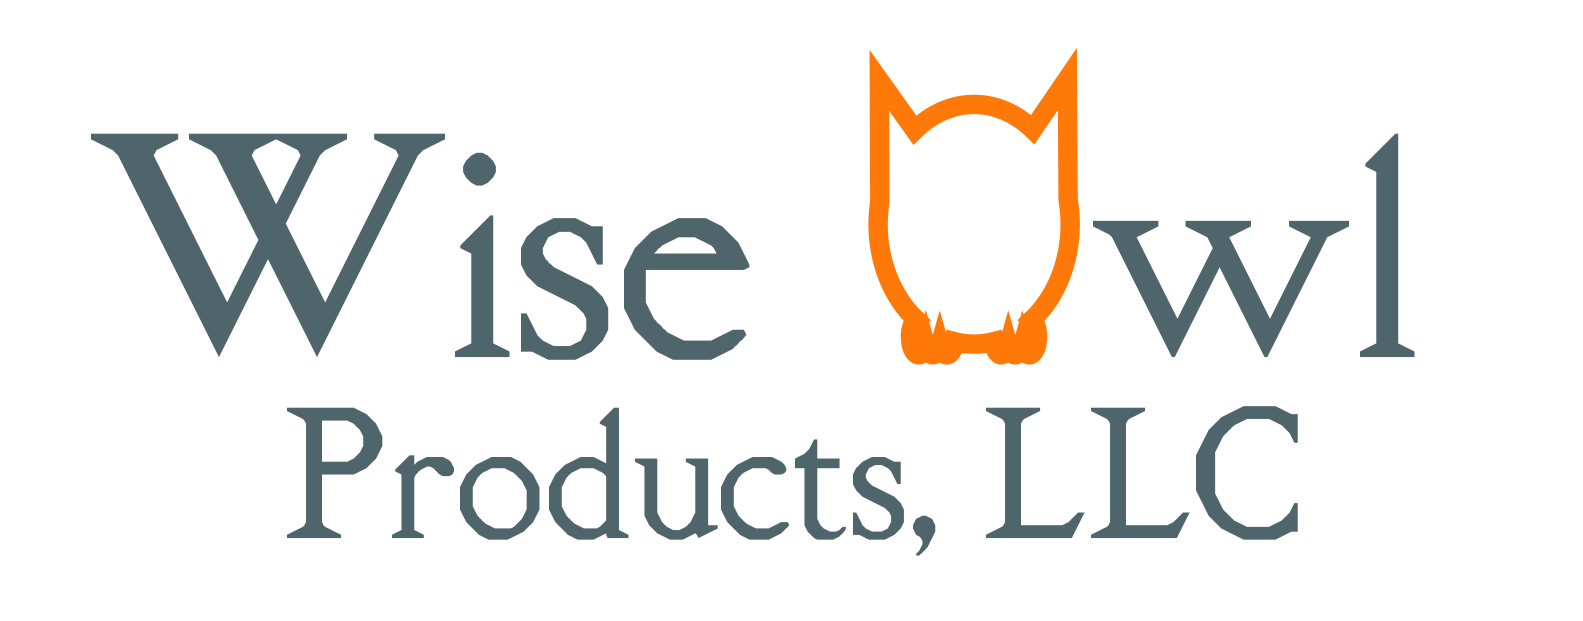 Wise Owl Products